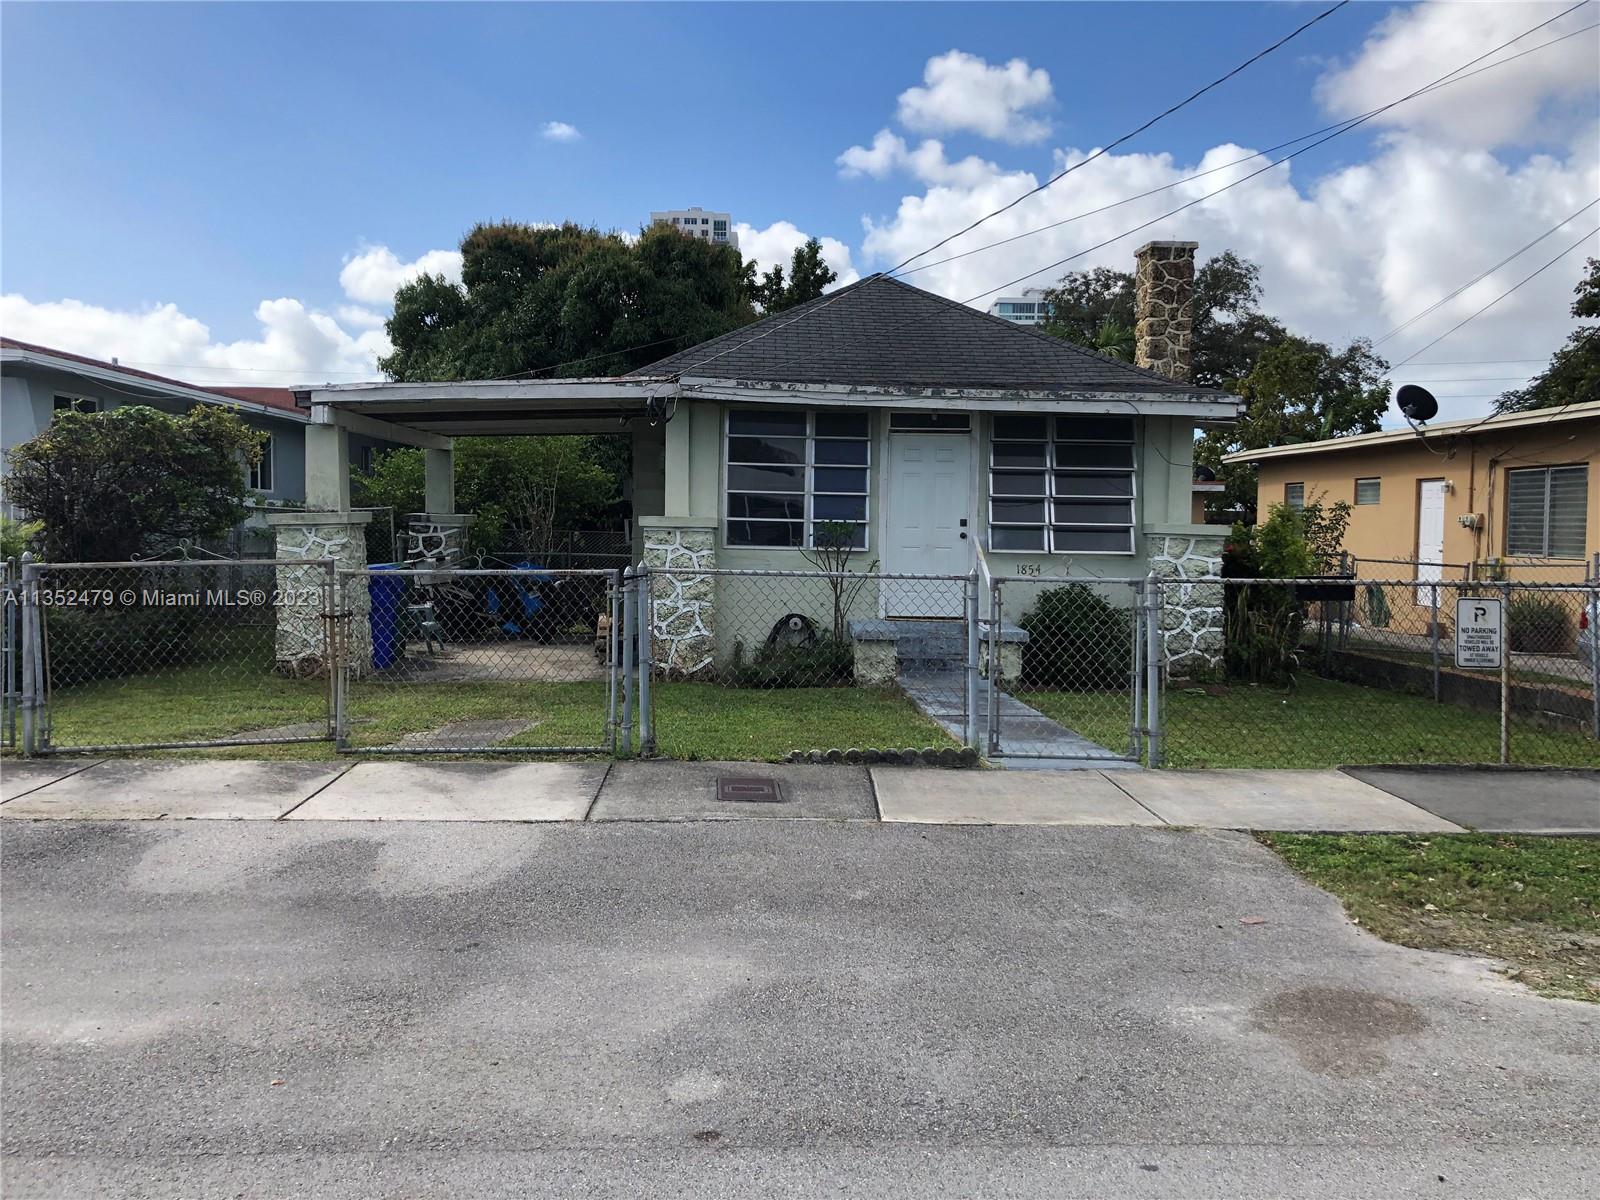 Photo 2 of 1854 NW 15th St in Miami - MLS A11352479